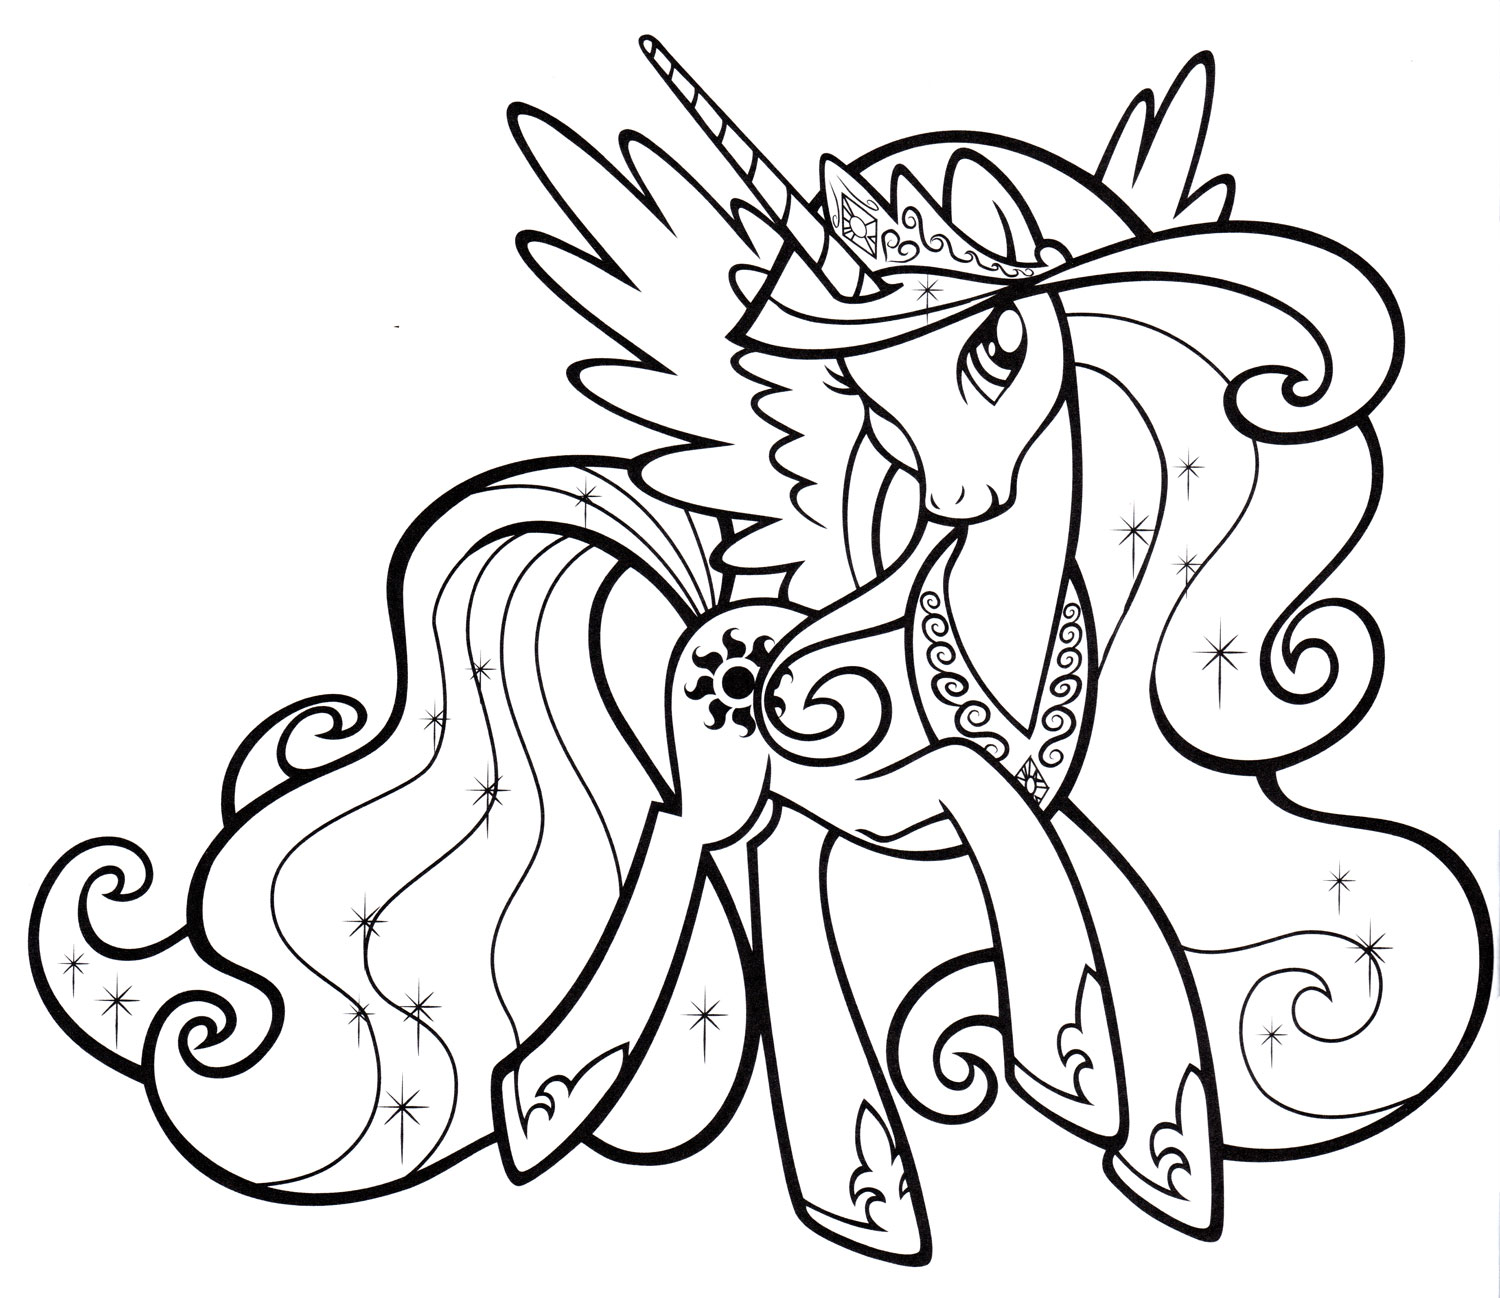 Pony Celestia Coloring Pages to download and print for free